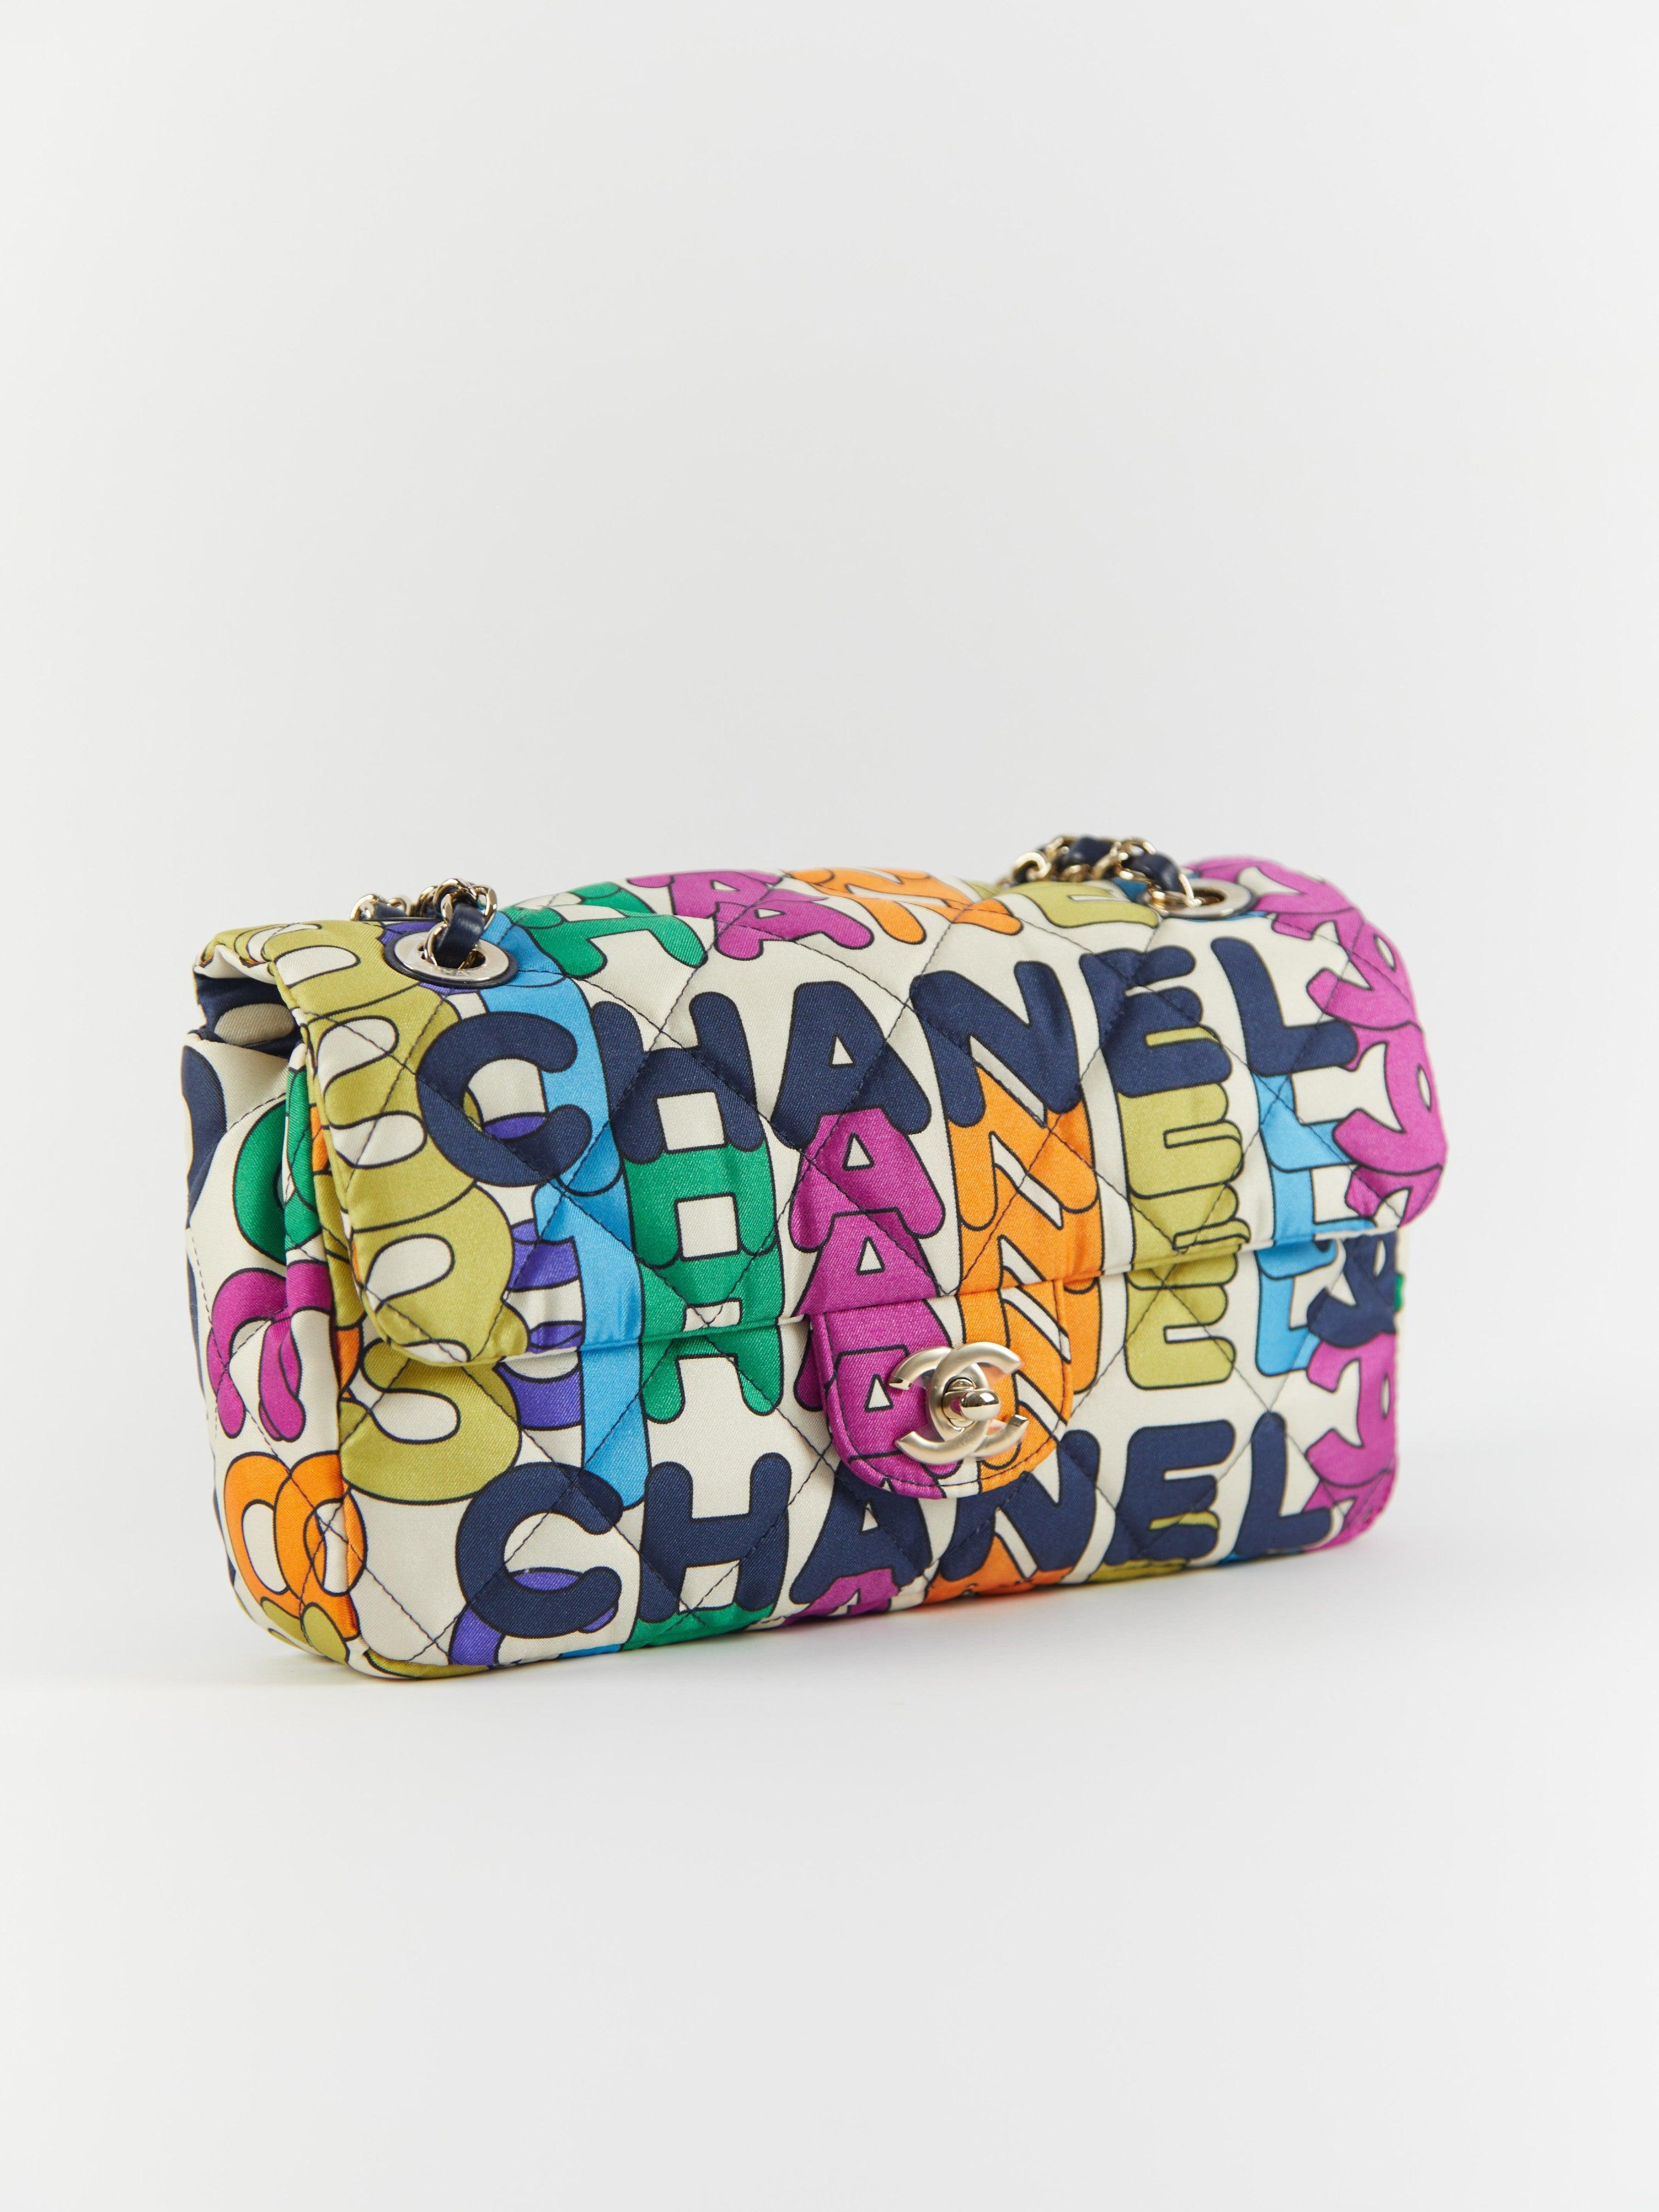 Rare Chanel 21k Rainbow Flap Bag 

Quilted Nylon with Gold-tone Hardware

Accompanied by: Chanel box, Chanel Dustbag, COA Card